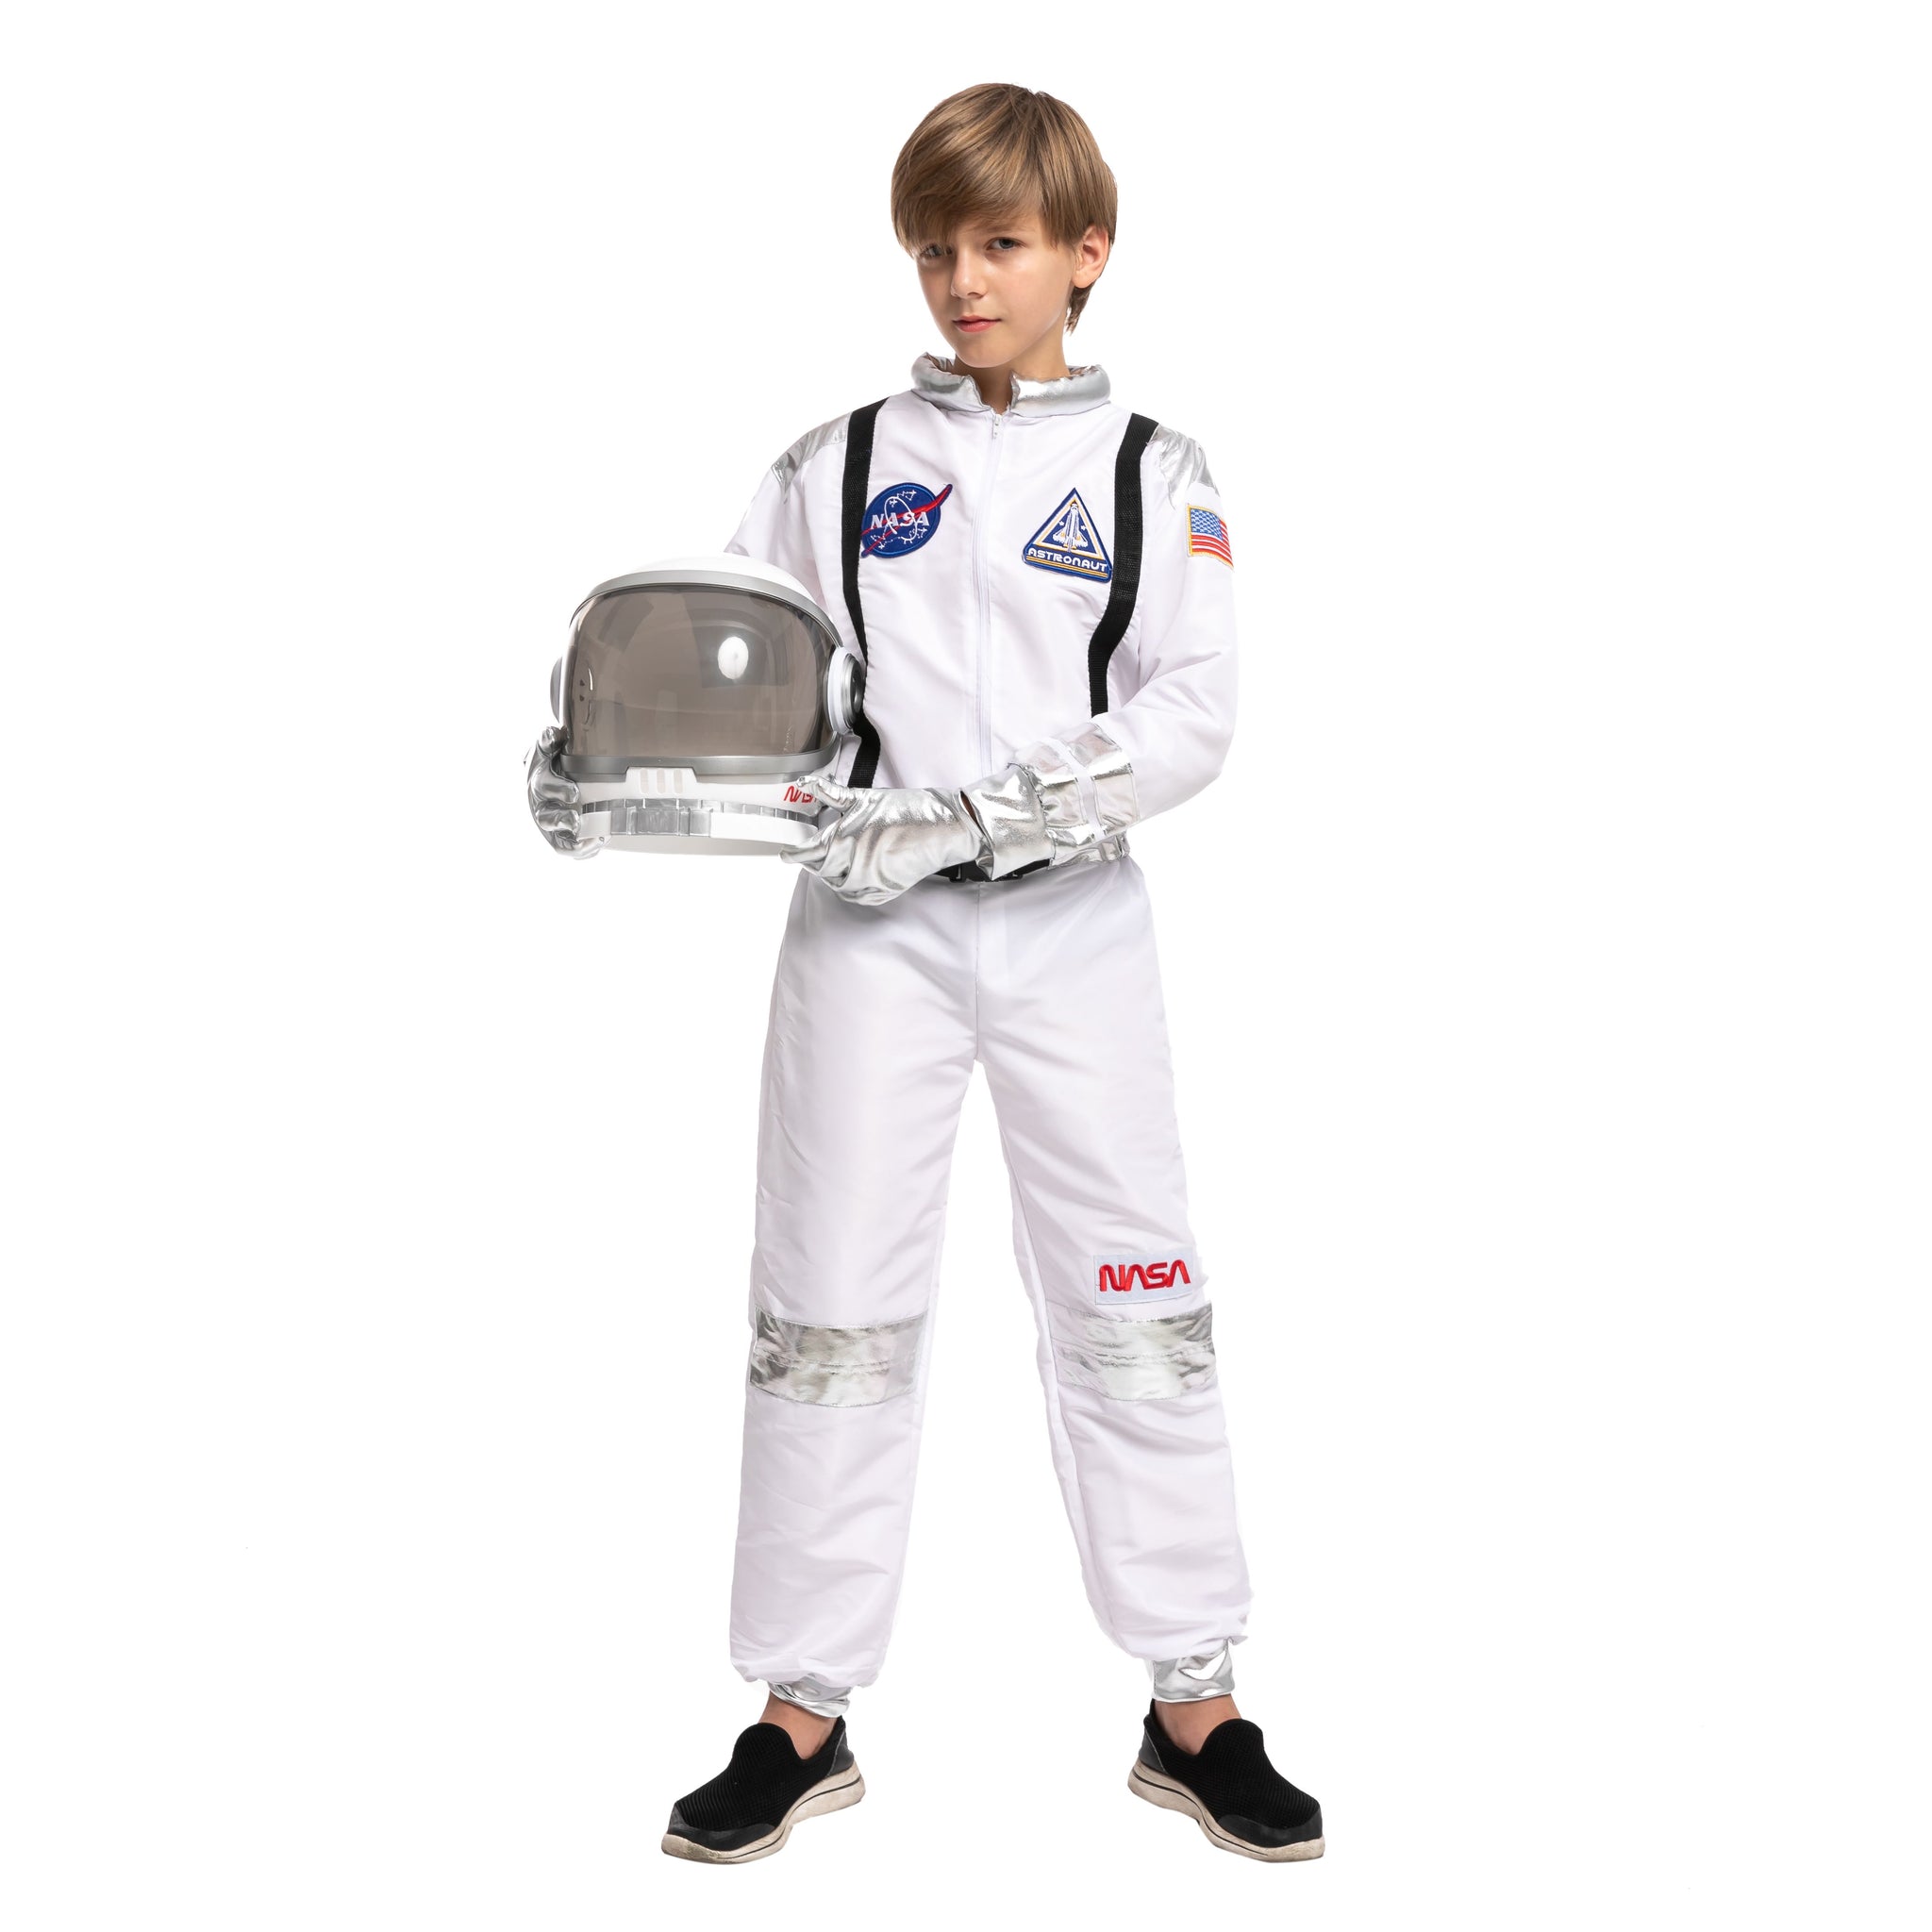 Astronaut Costume with Silver Stripes- SPOOKTACULAR